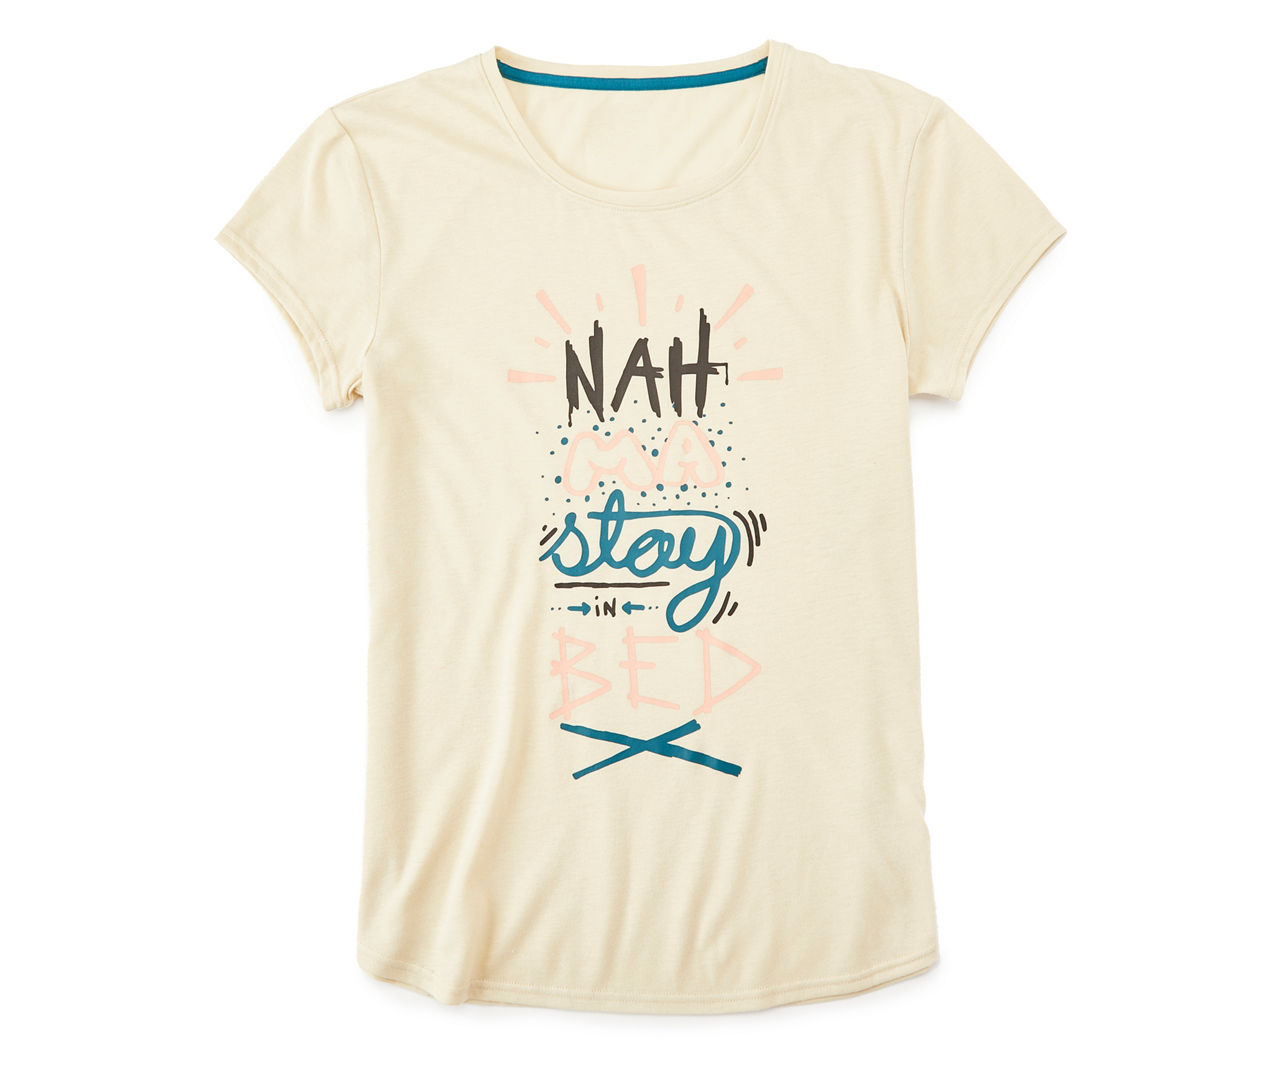 Women's Medium "Nah Ma Stay in Bed" Graphic Tee